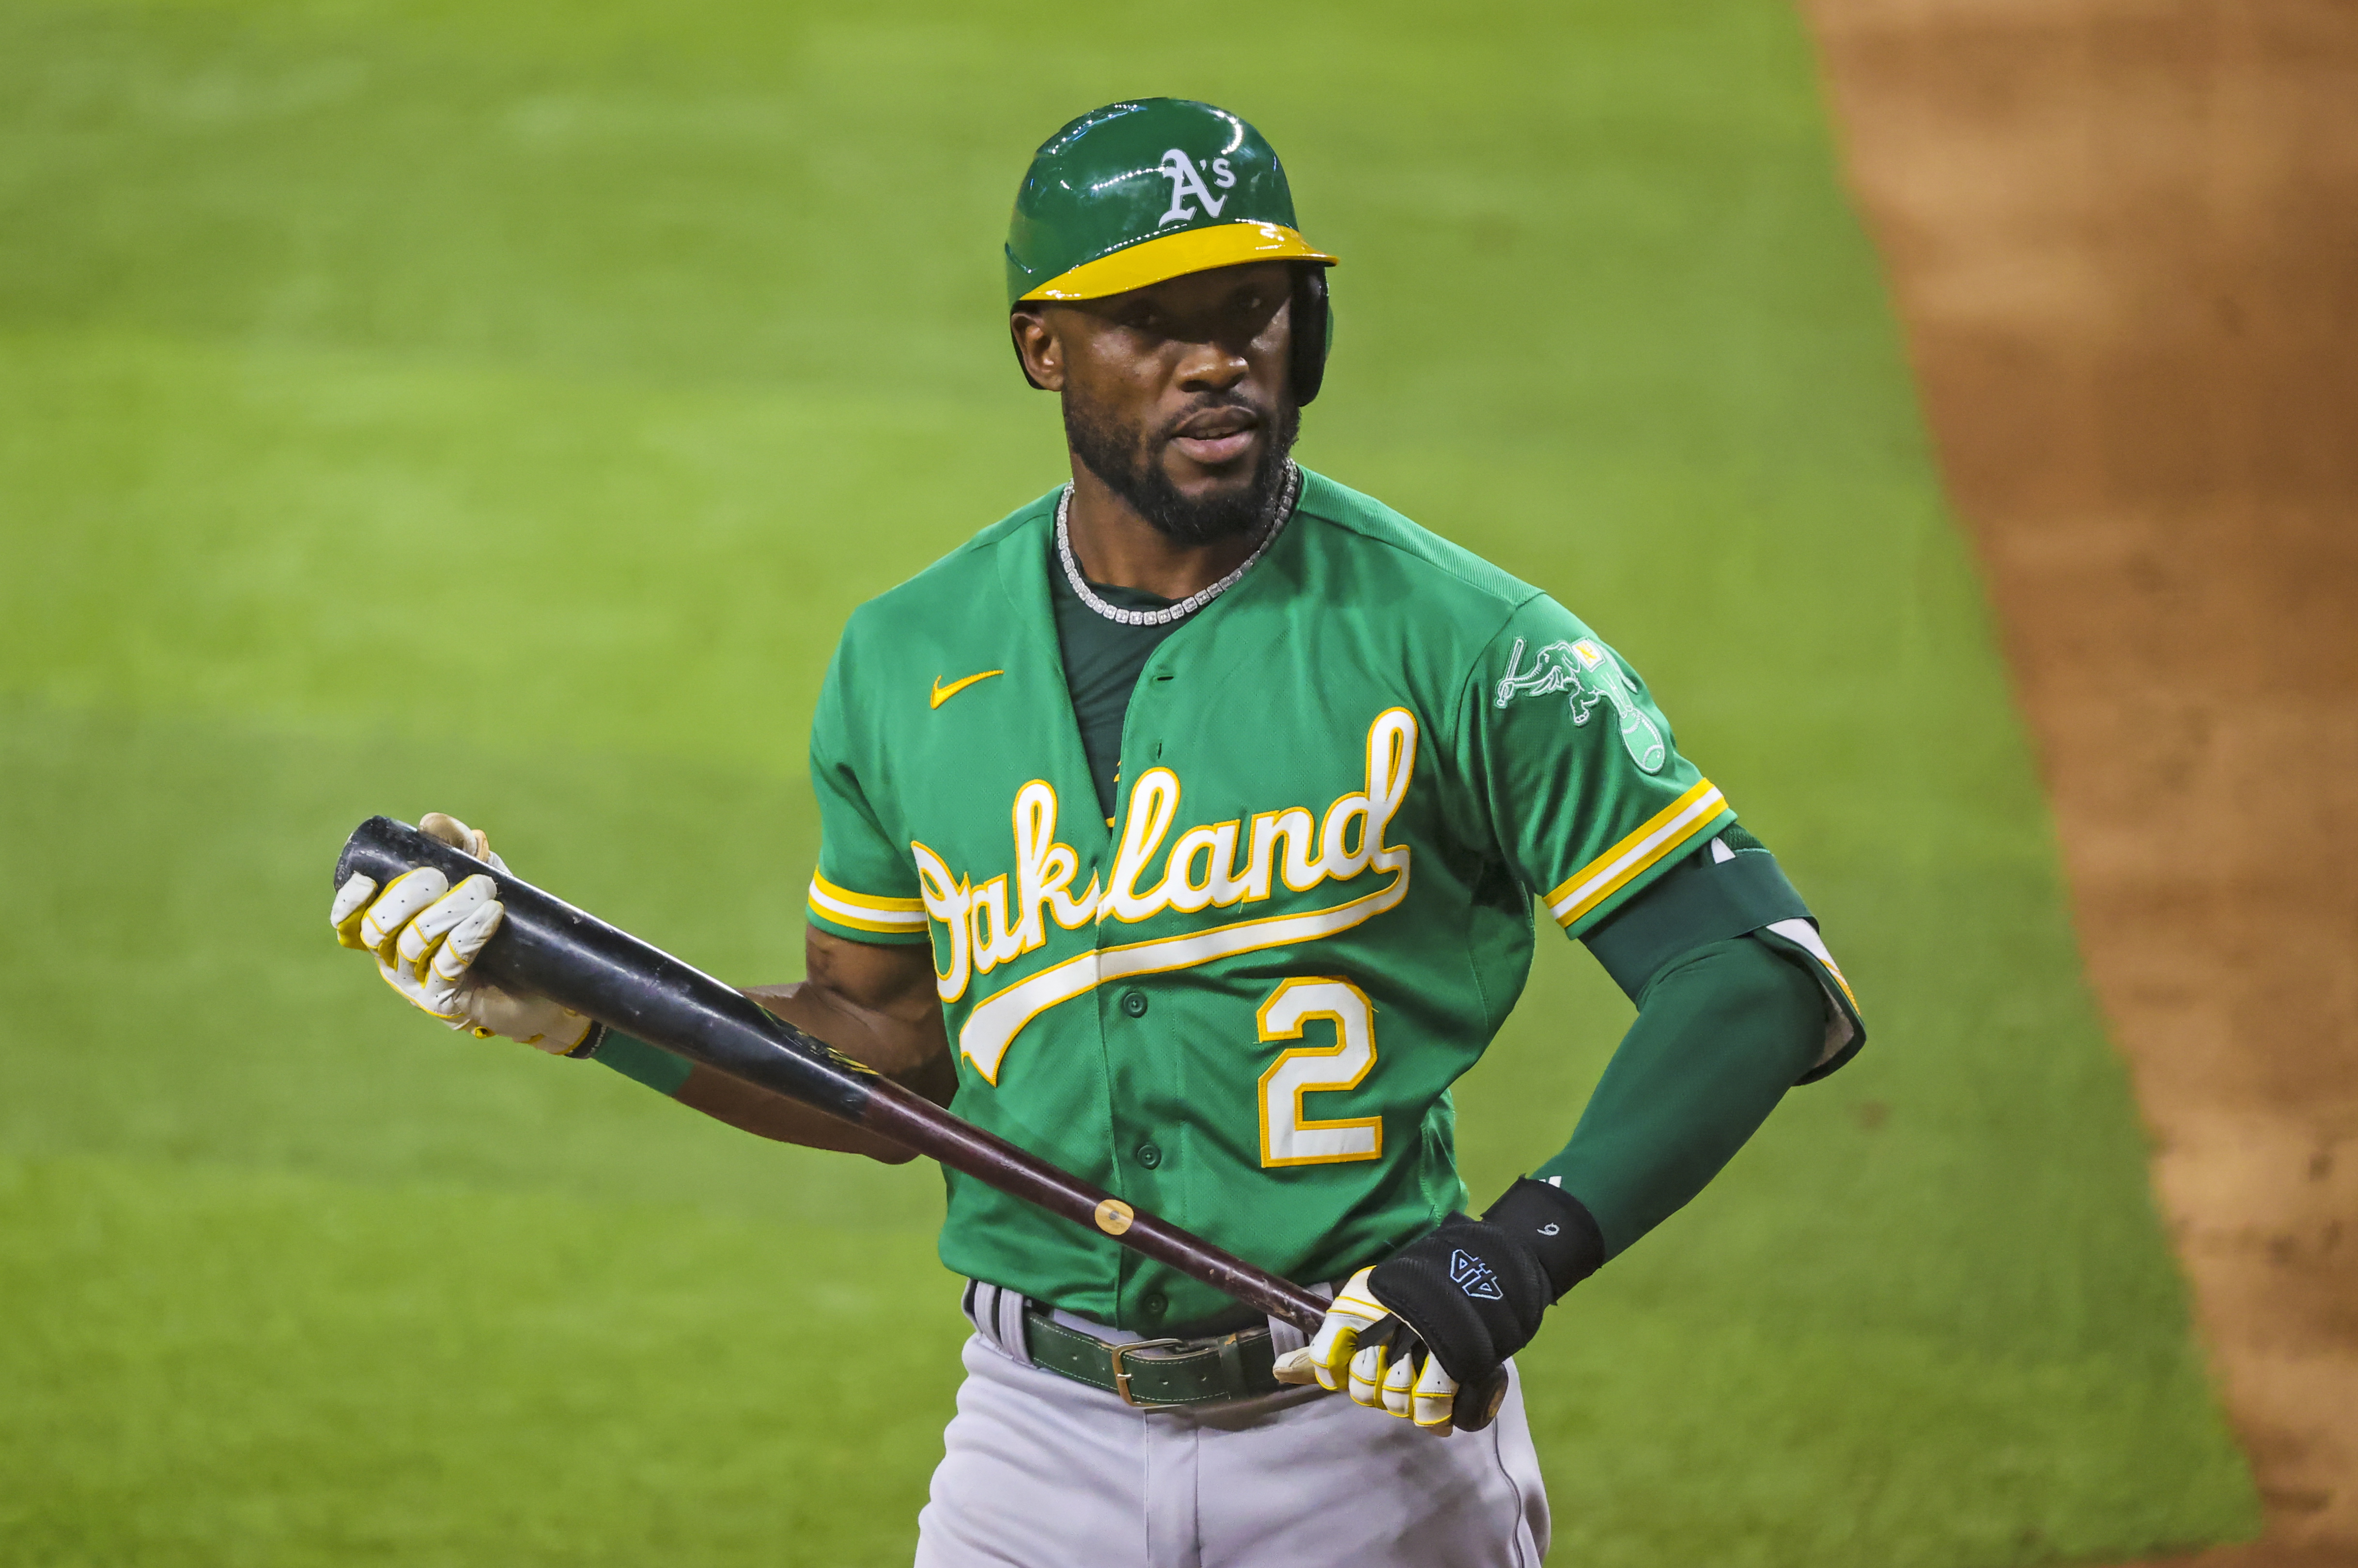 Aug 13, 2021; Arlington, Texas, USA;  Oakland Athletics center fielder Starling Marte (2) reacts after striking out during the ninth inning against the Texas Rangers at Globe Life Field. Mandatory Credit: Kevin Jairaj-USA TODAY Sports